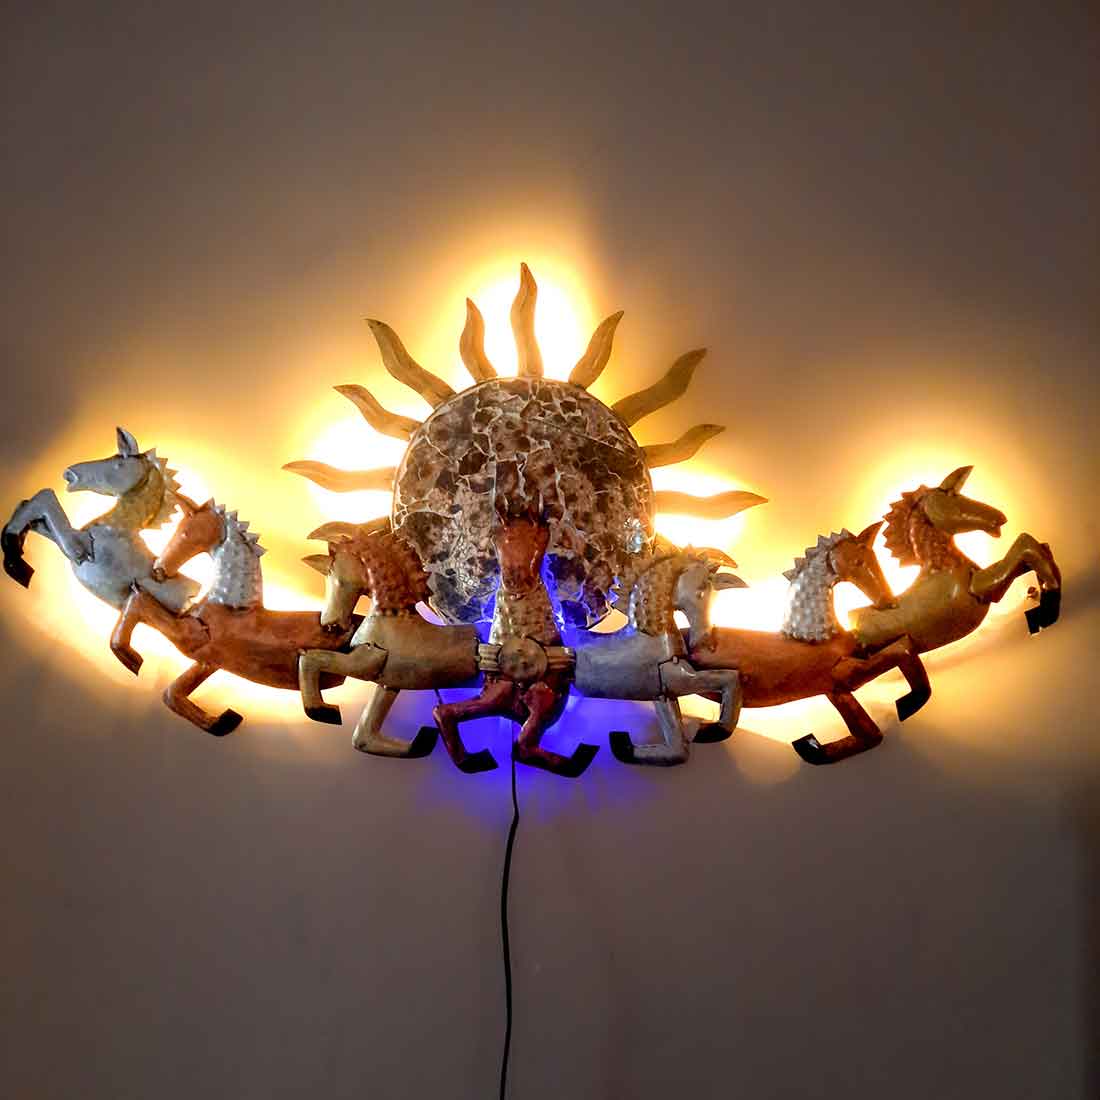 LED Wall Hanging  Decor -Wall Sculpture - For Living Room Interior Decoration - 36 Inch - ApkaMart